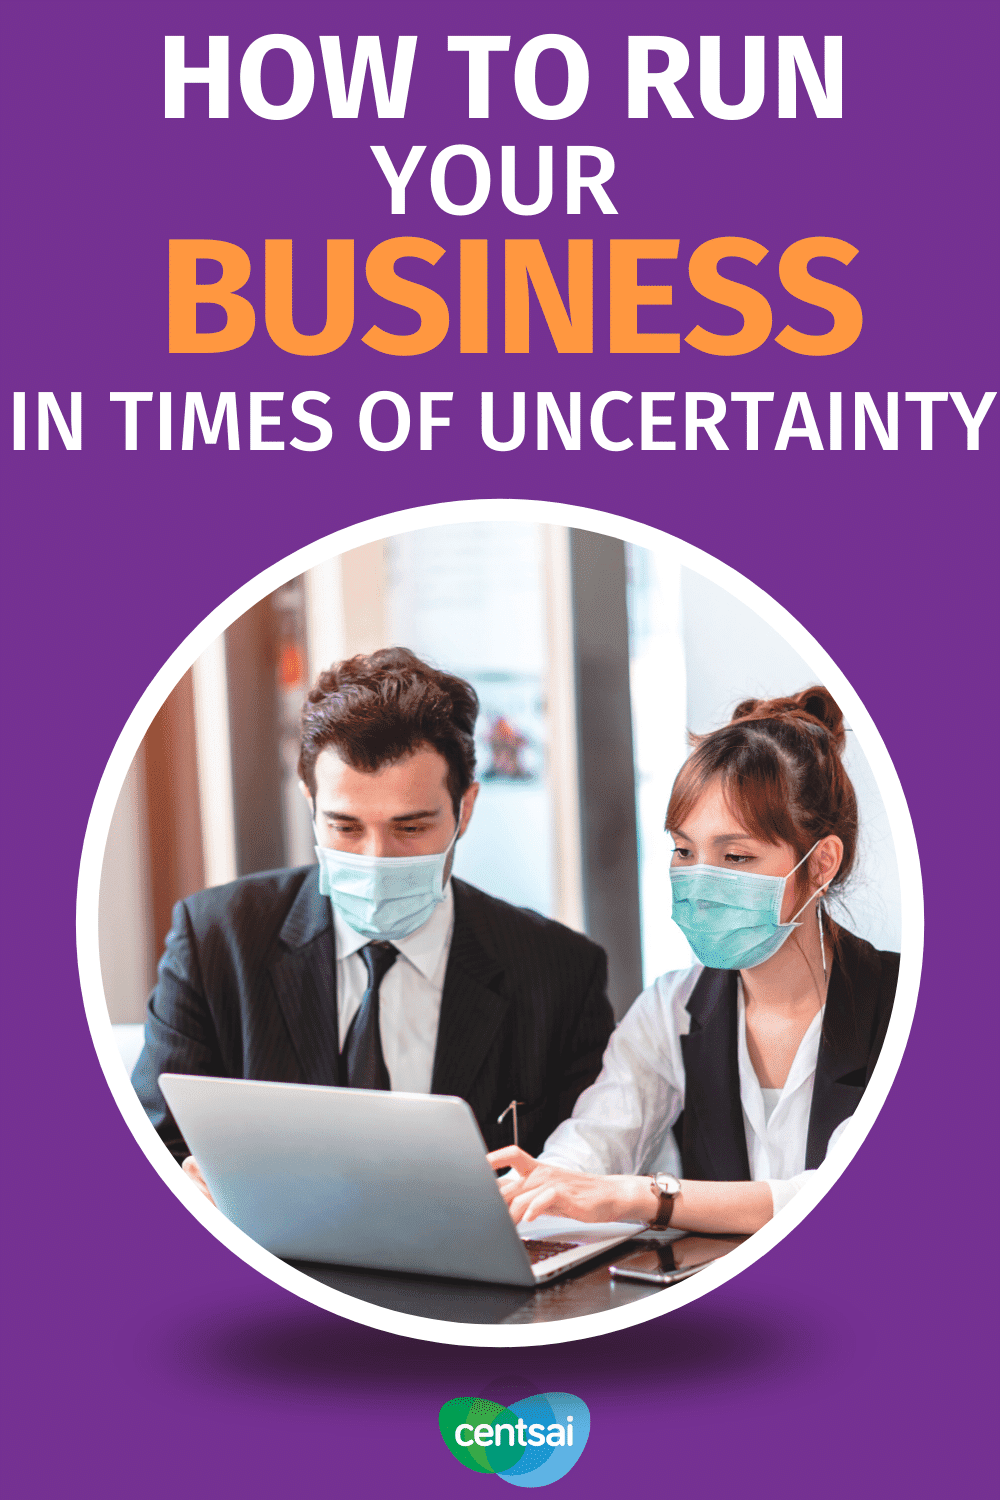 How to Run Your Business in Times of Uncertainty